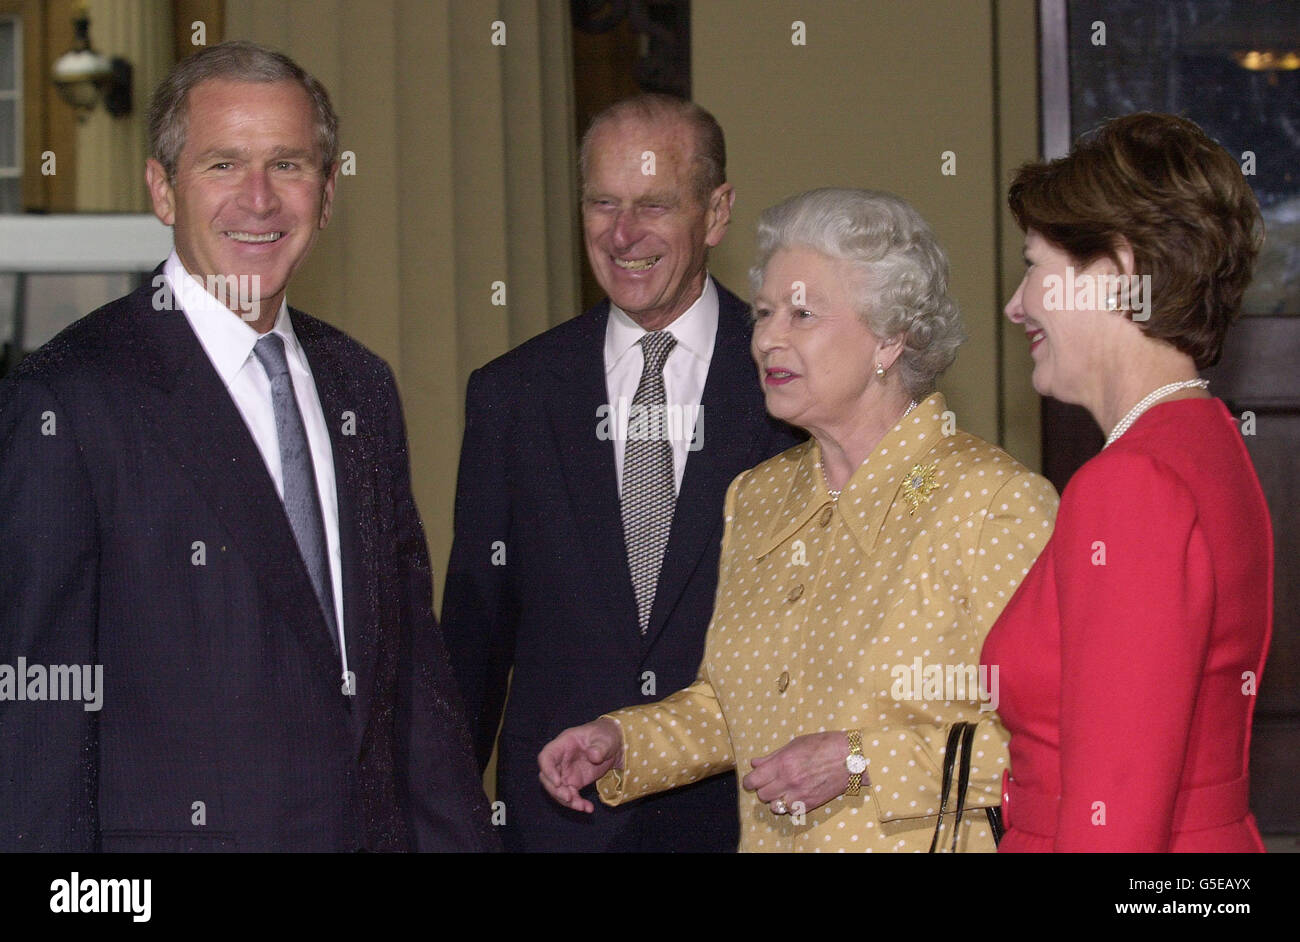 America's President Bush (left) stands, his jacket covered with rain, alongside Britain's Queen Elizabeth II and the Duke of Edinbugh as he arrives with his wife, Laura, at Buckingham Palace for lunch. The US president is on his first visit to the United Kingdom, before travelling on to the G8. Stock Photo